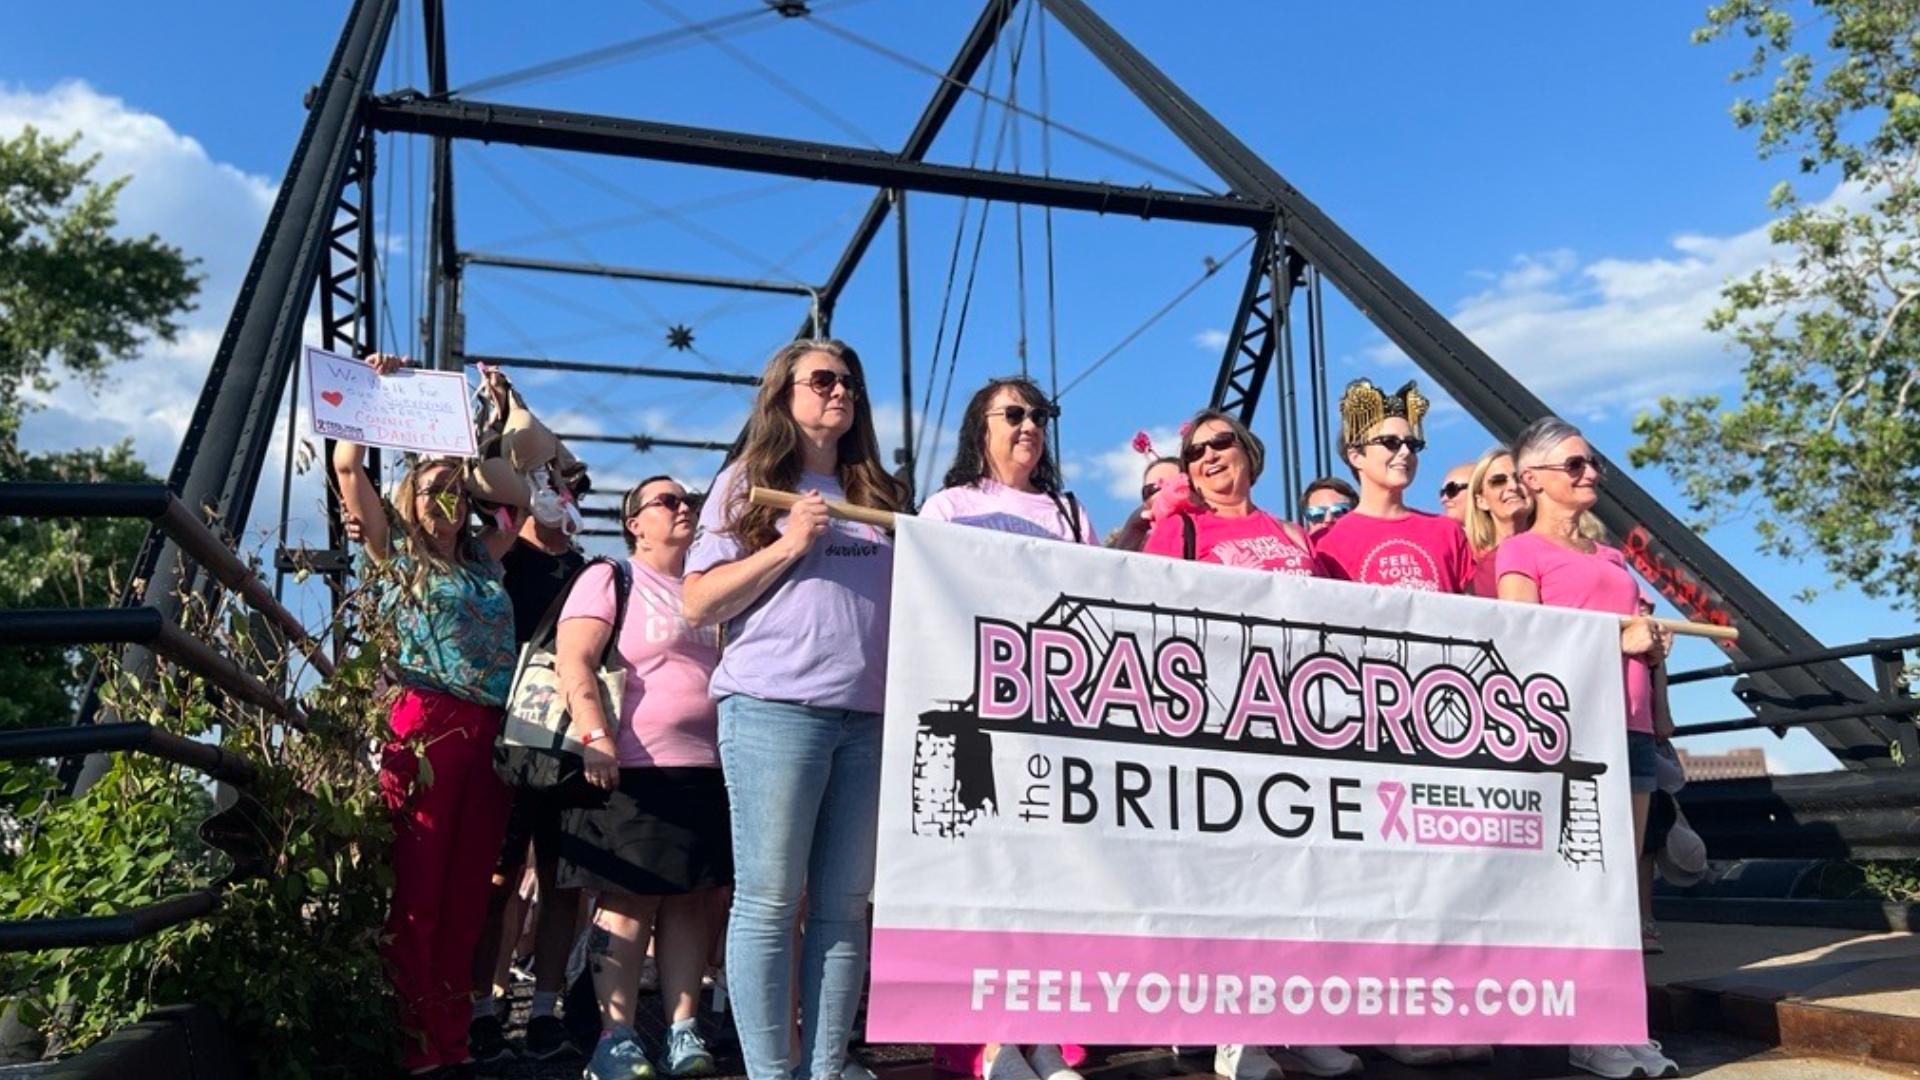 More than 1,000 bras spread across the Walnut Street Bridge in Harrisburg, as the Feel Your Boobies Foundation celebrated its 20-year anniversary.